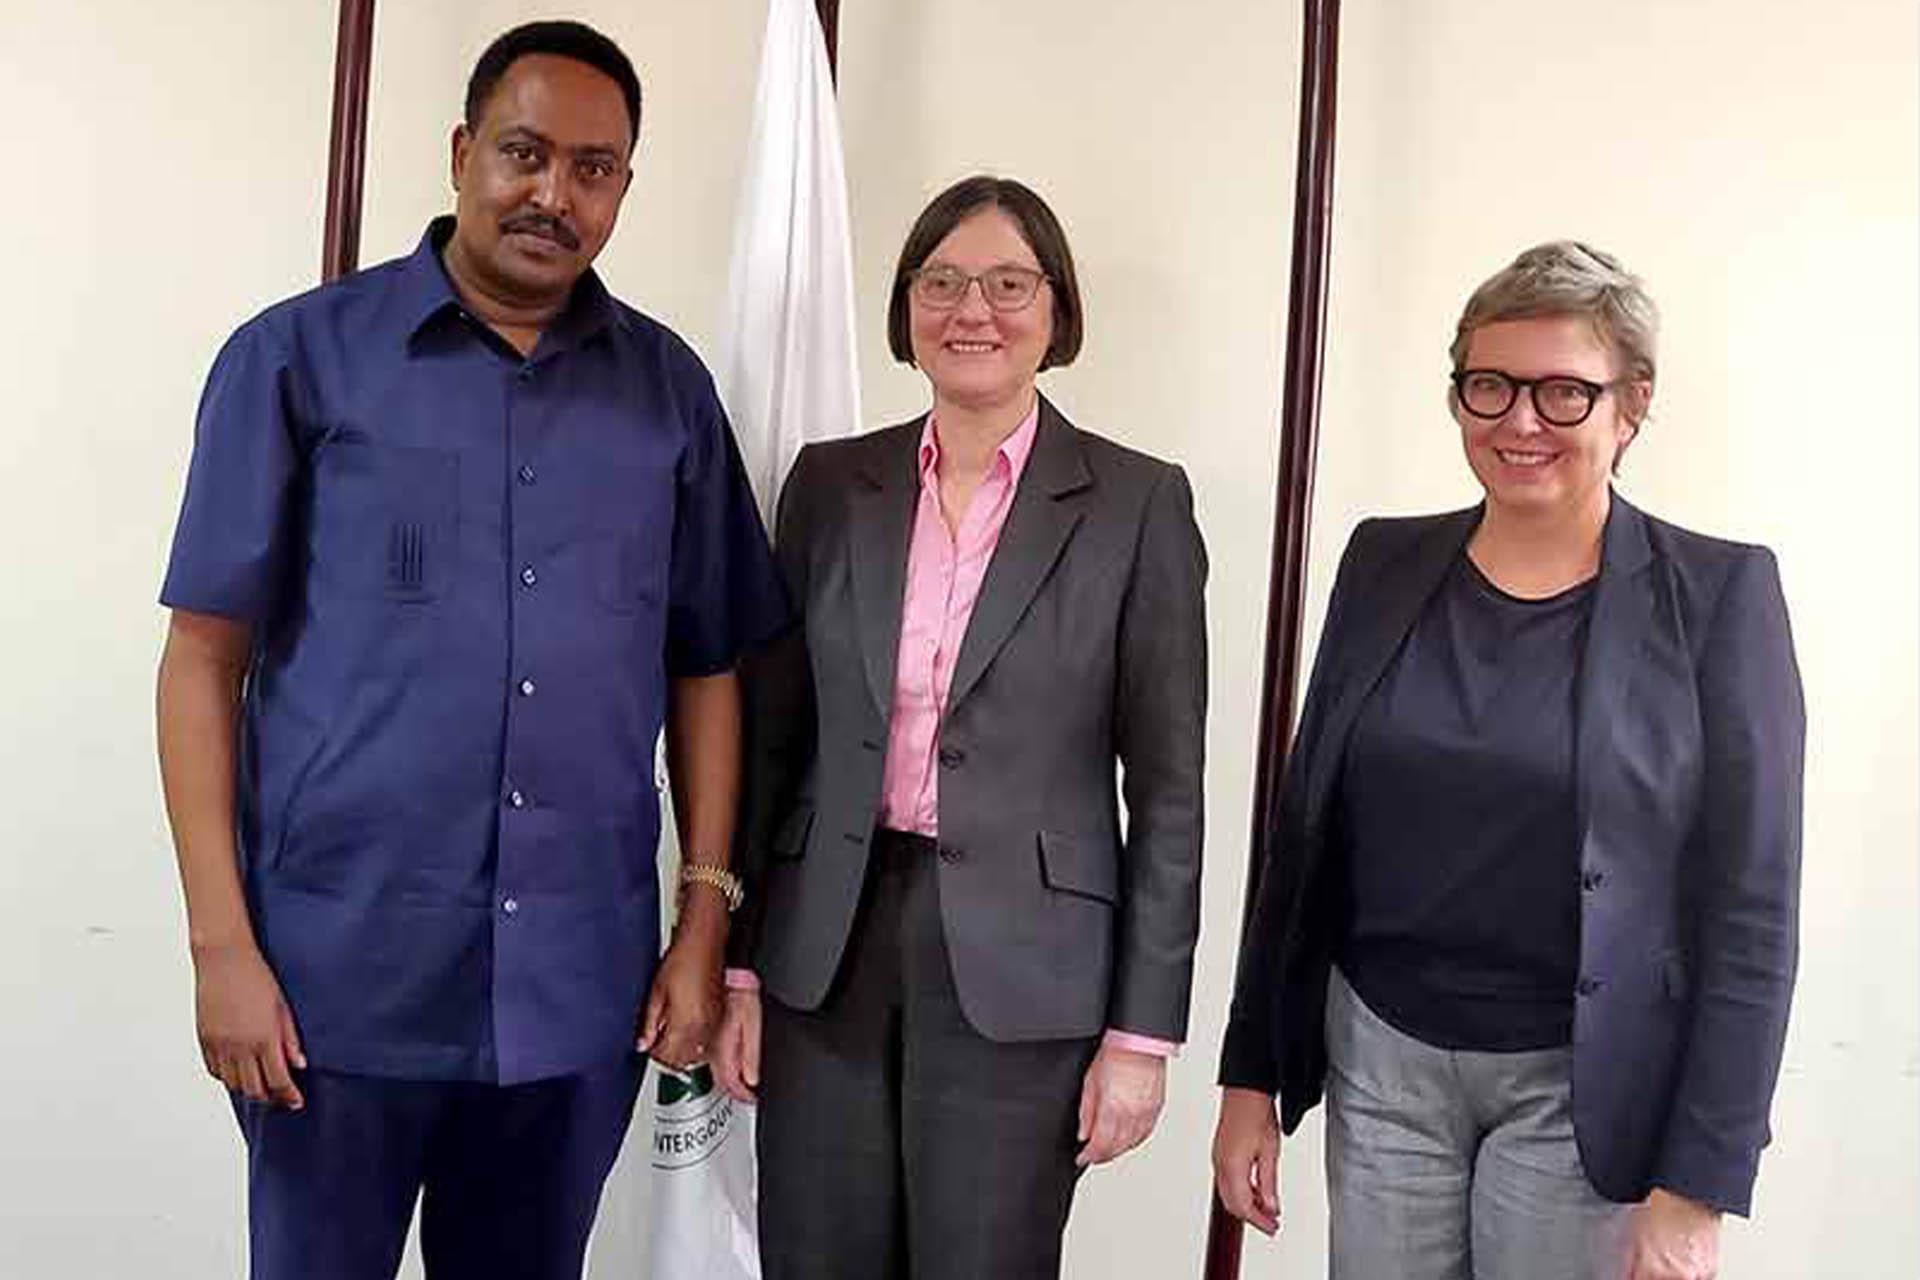 IGAD EXECUTIVE SECRETARY, DR. WORKNEH GEBEYEHU MEETS A HIGH LEVEL DELEGATION FROM DENMARK ON CONTINUED SUPPORT FOR PEACE AND PROSPERITY OF THE REGION